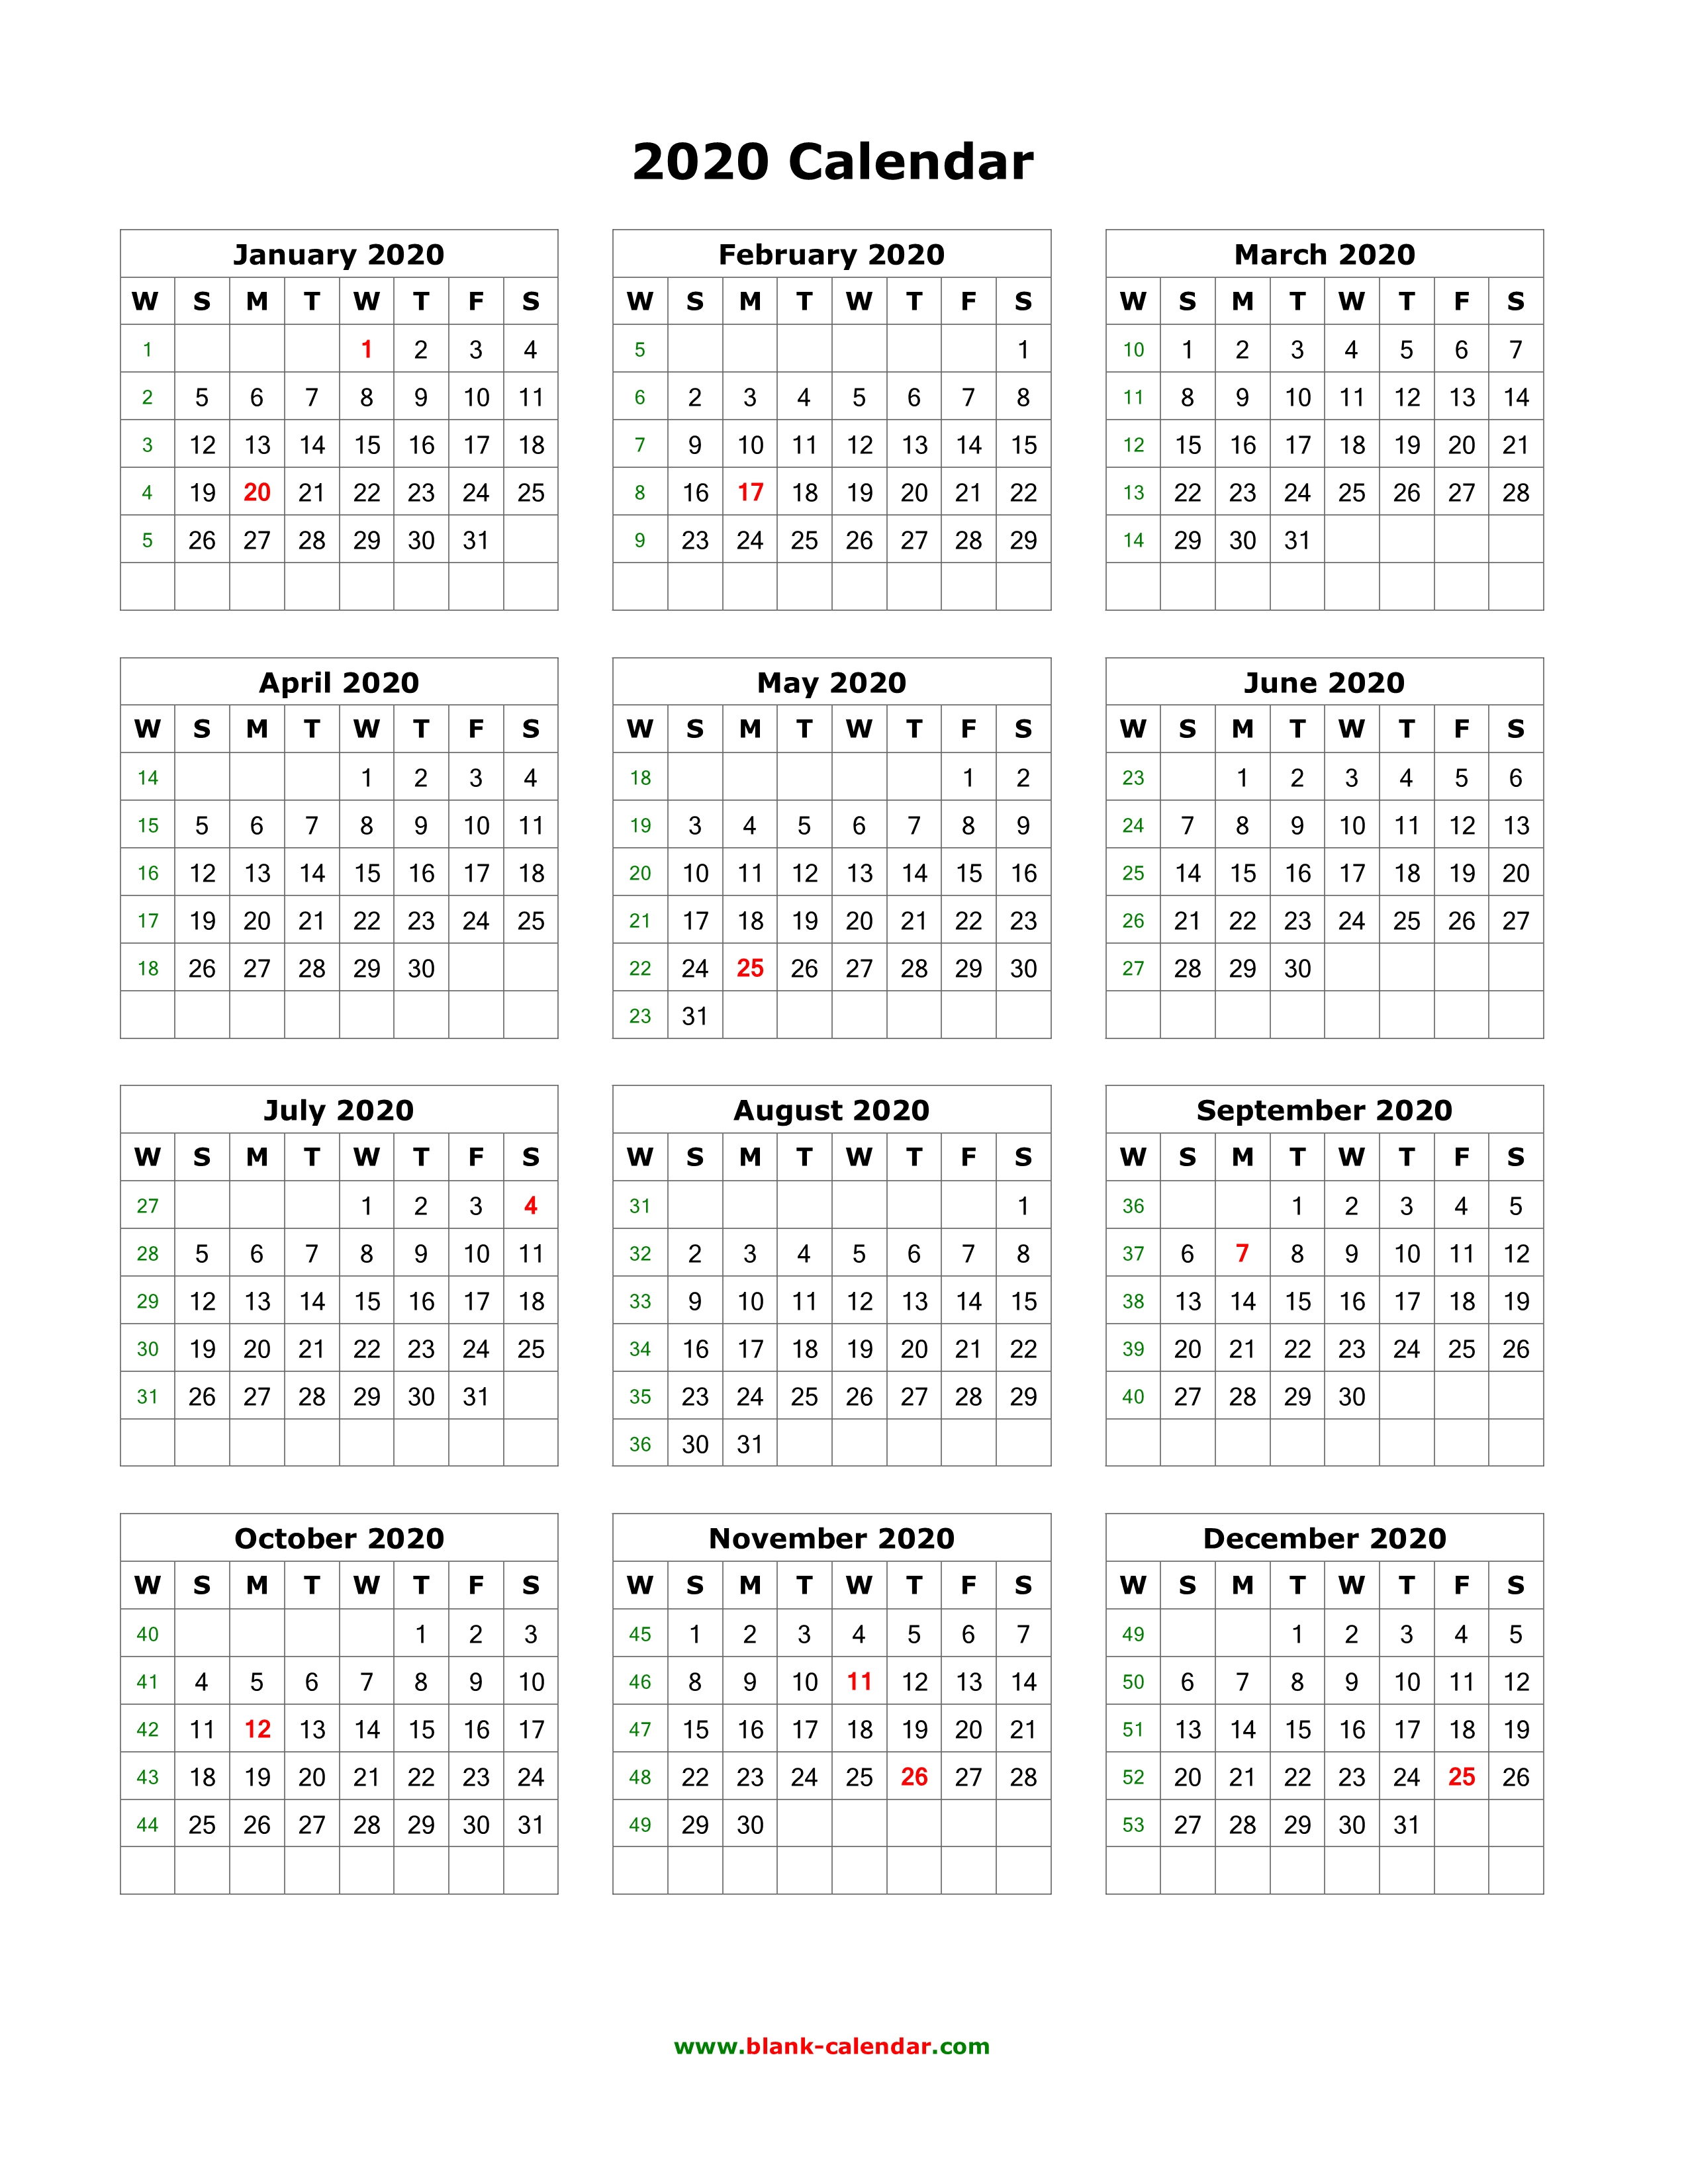 Download Blank Calendar 2020 (12 Months On One Page, Vertical)